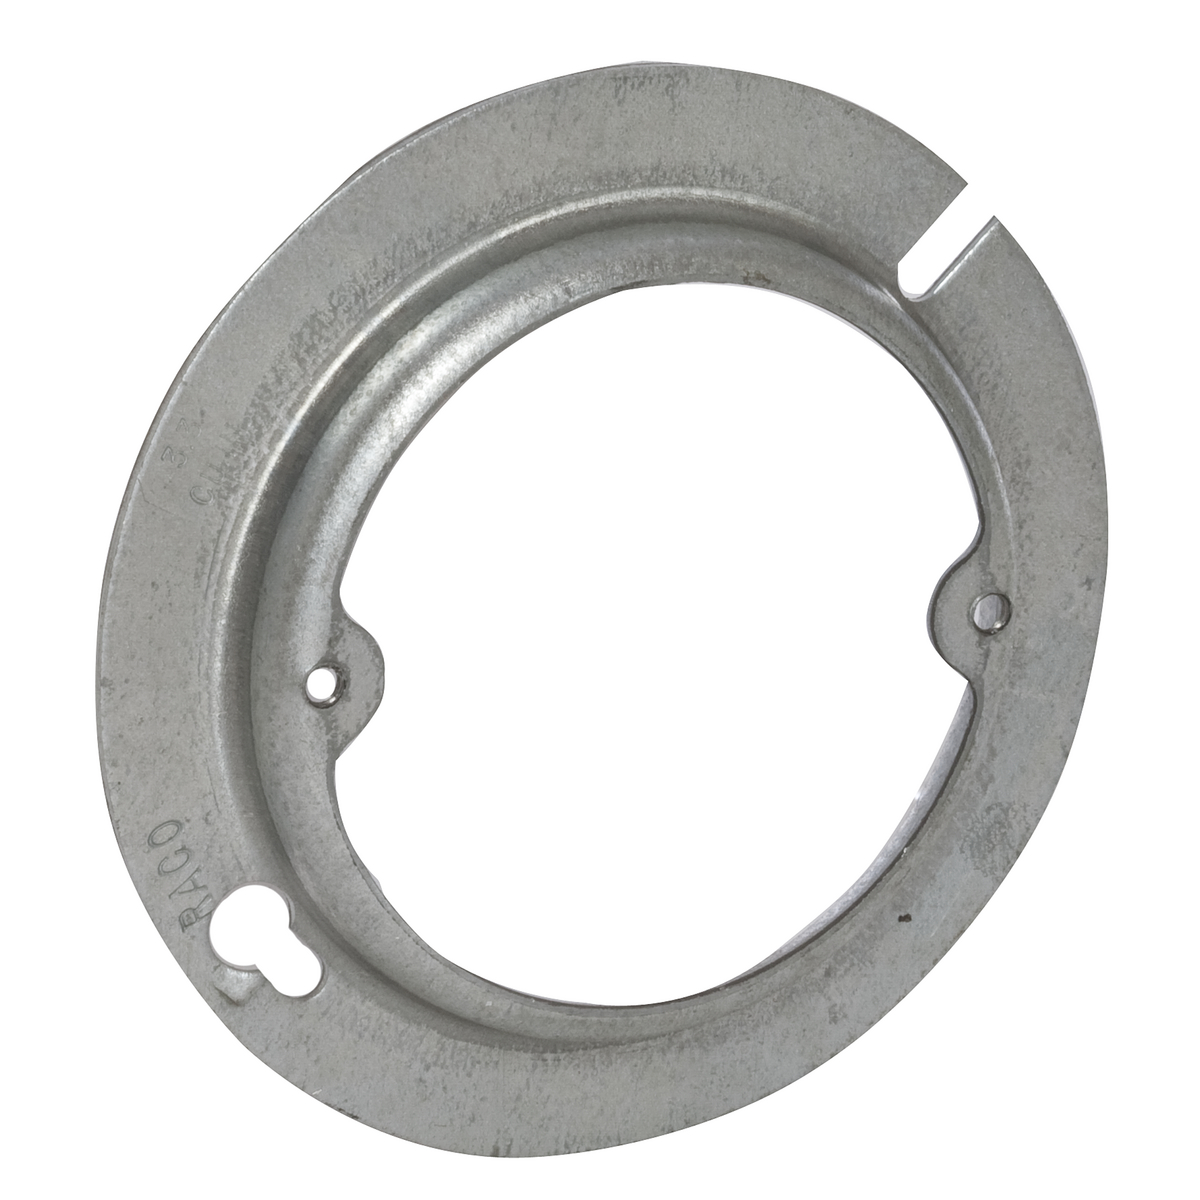 RACO 732 4" ROUND 1D PLASTER RING